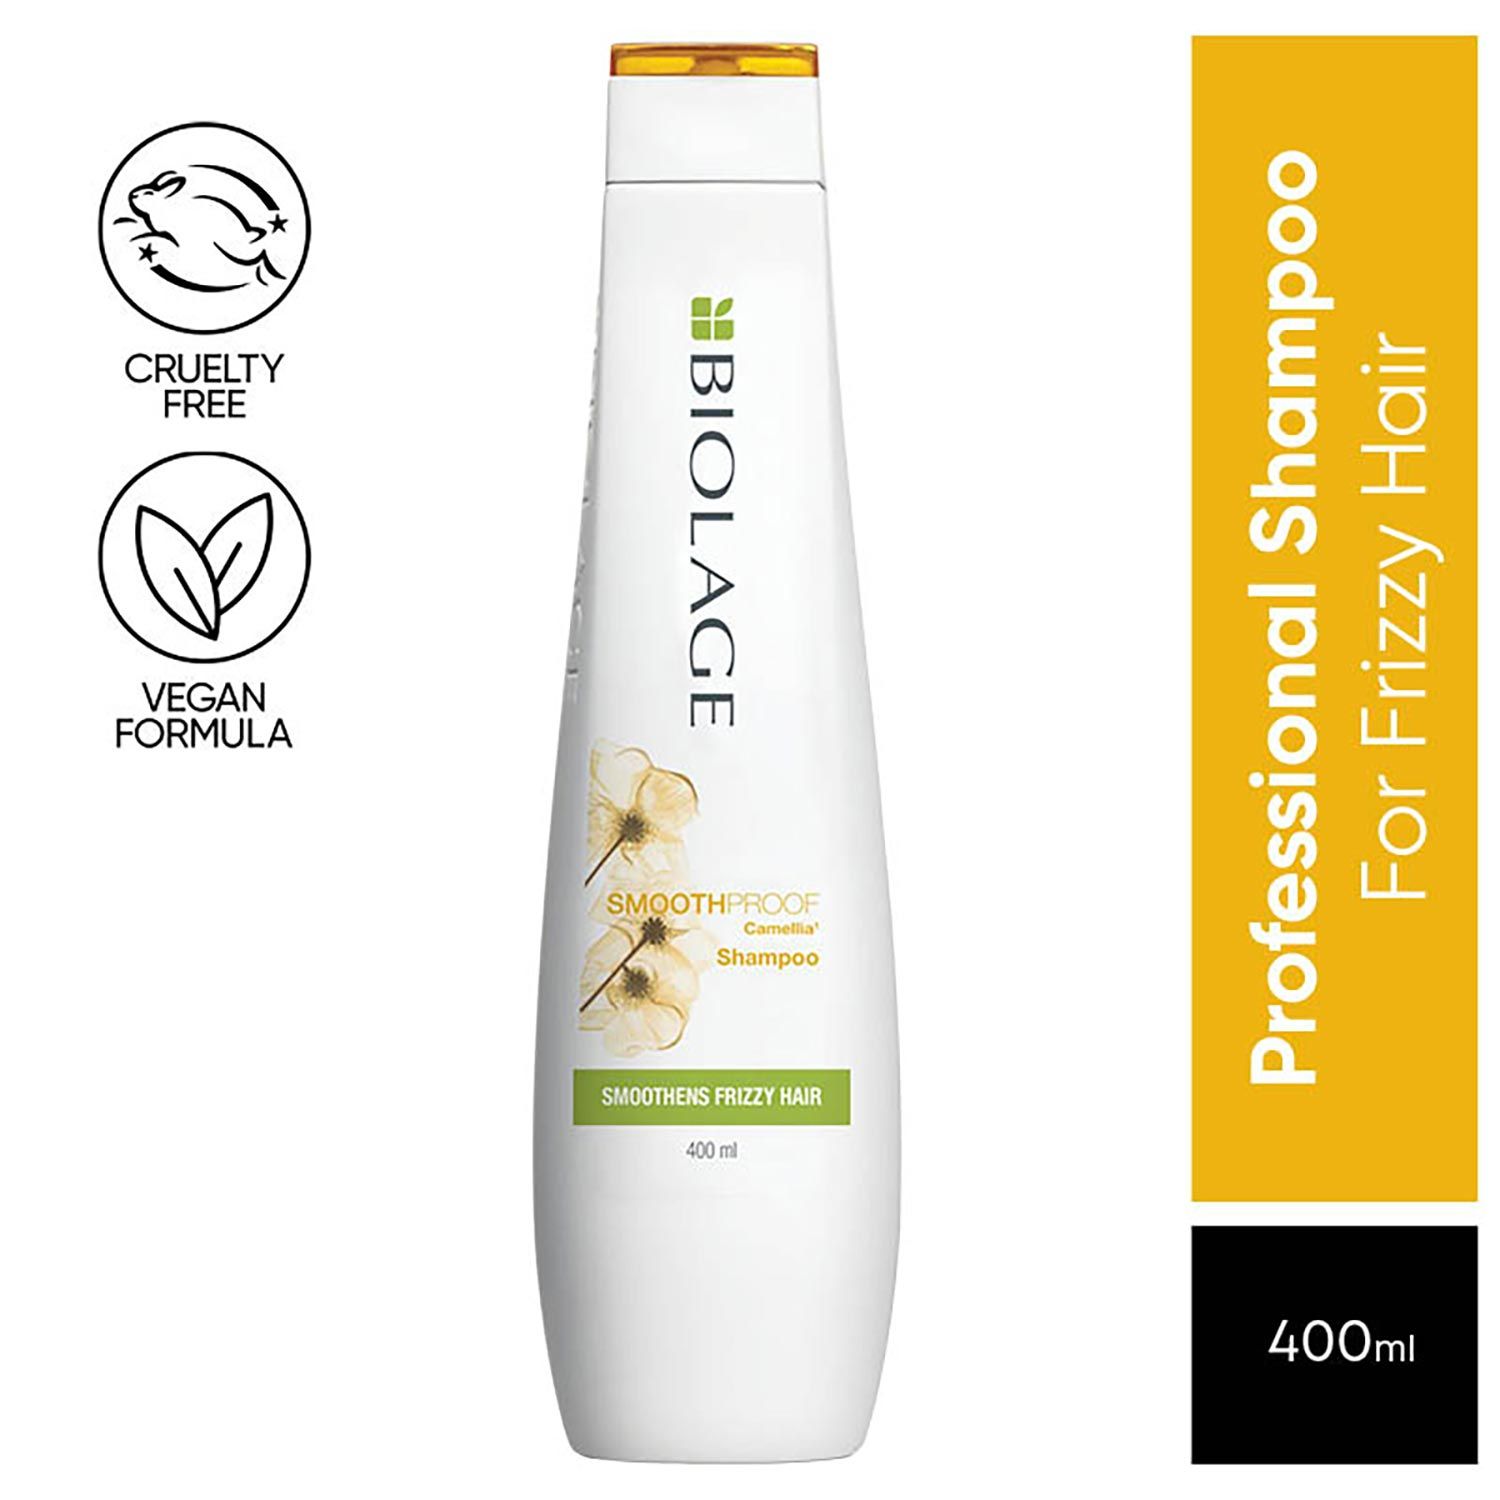 Buy BIOLAGE Smoothproof Shampoo 400ml | Paraben free| Cleanses, Smooths & Controls Frizz | For Frizzy Hair - Purplle